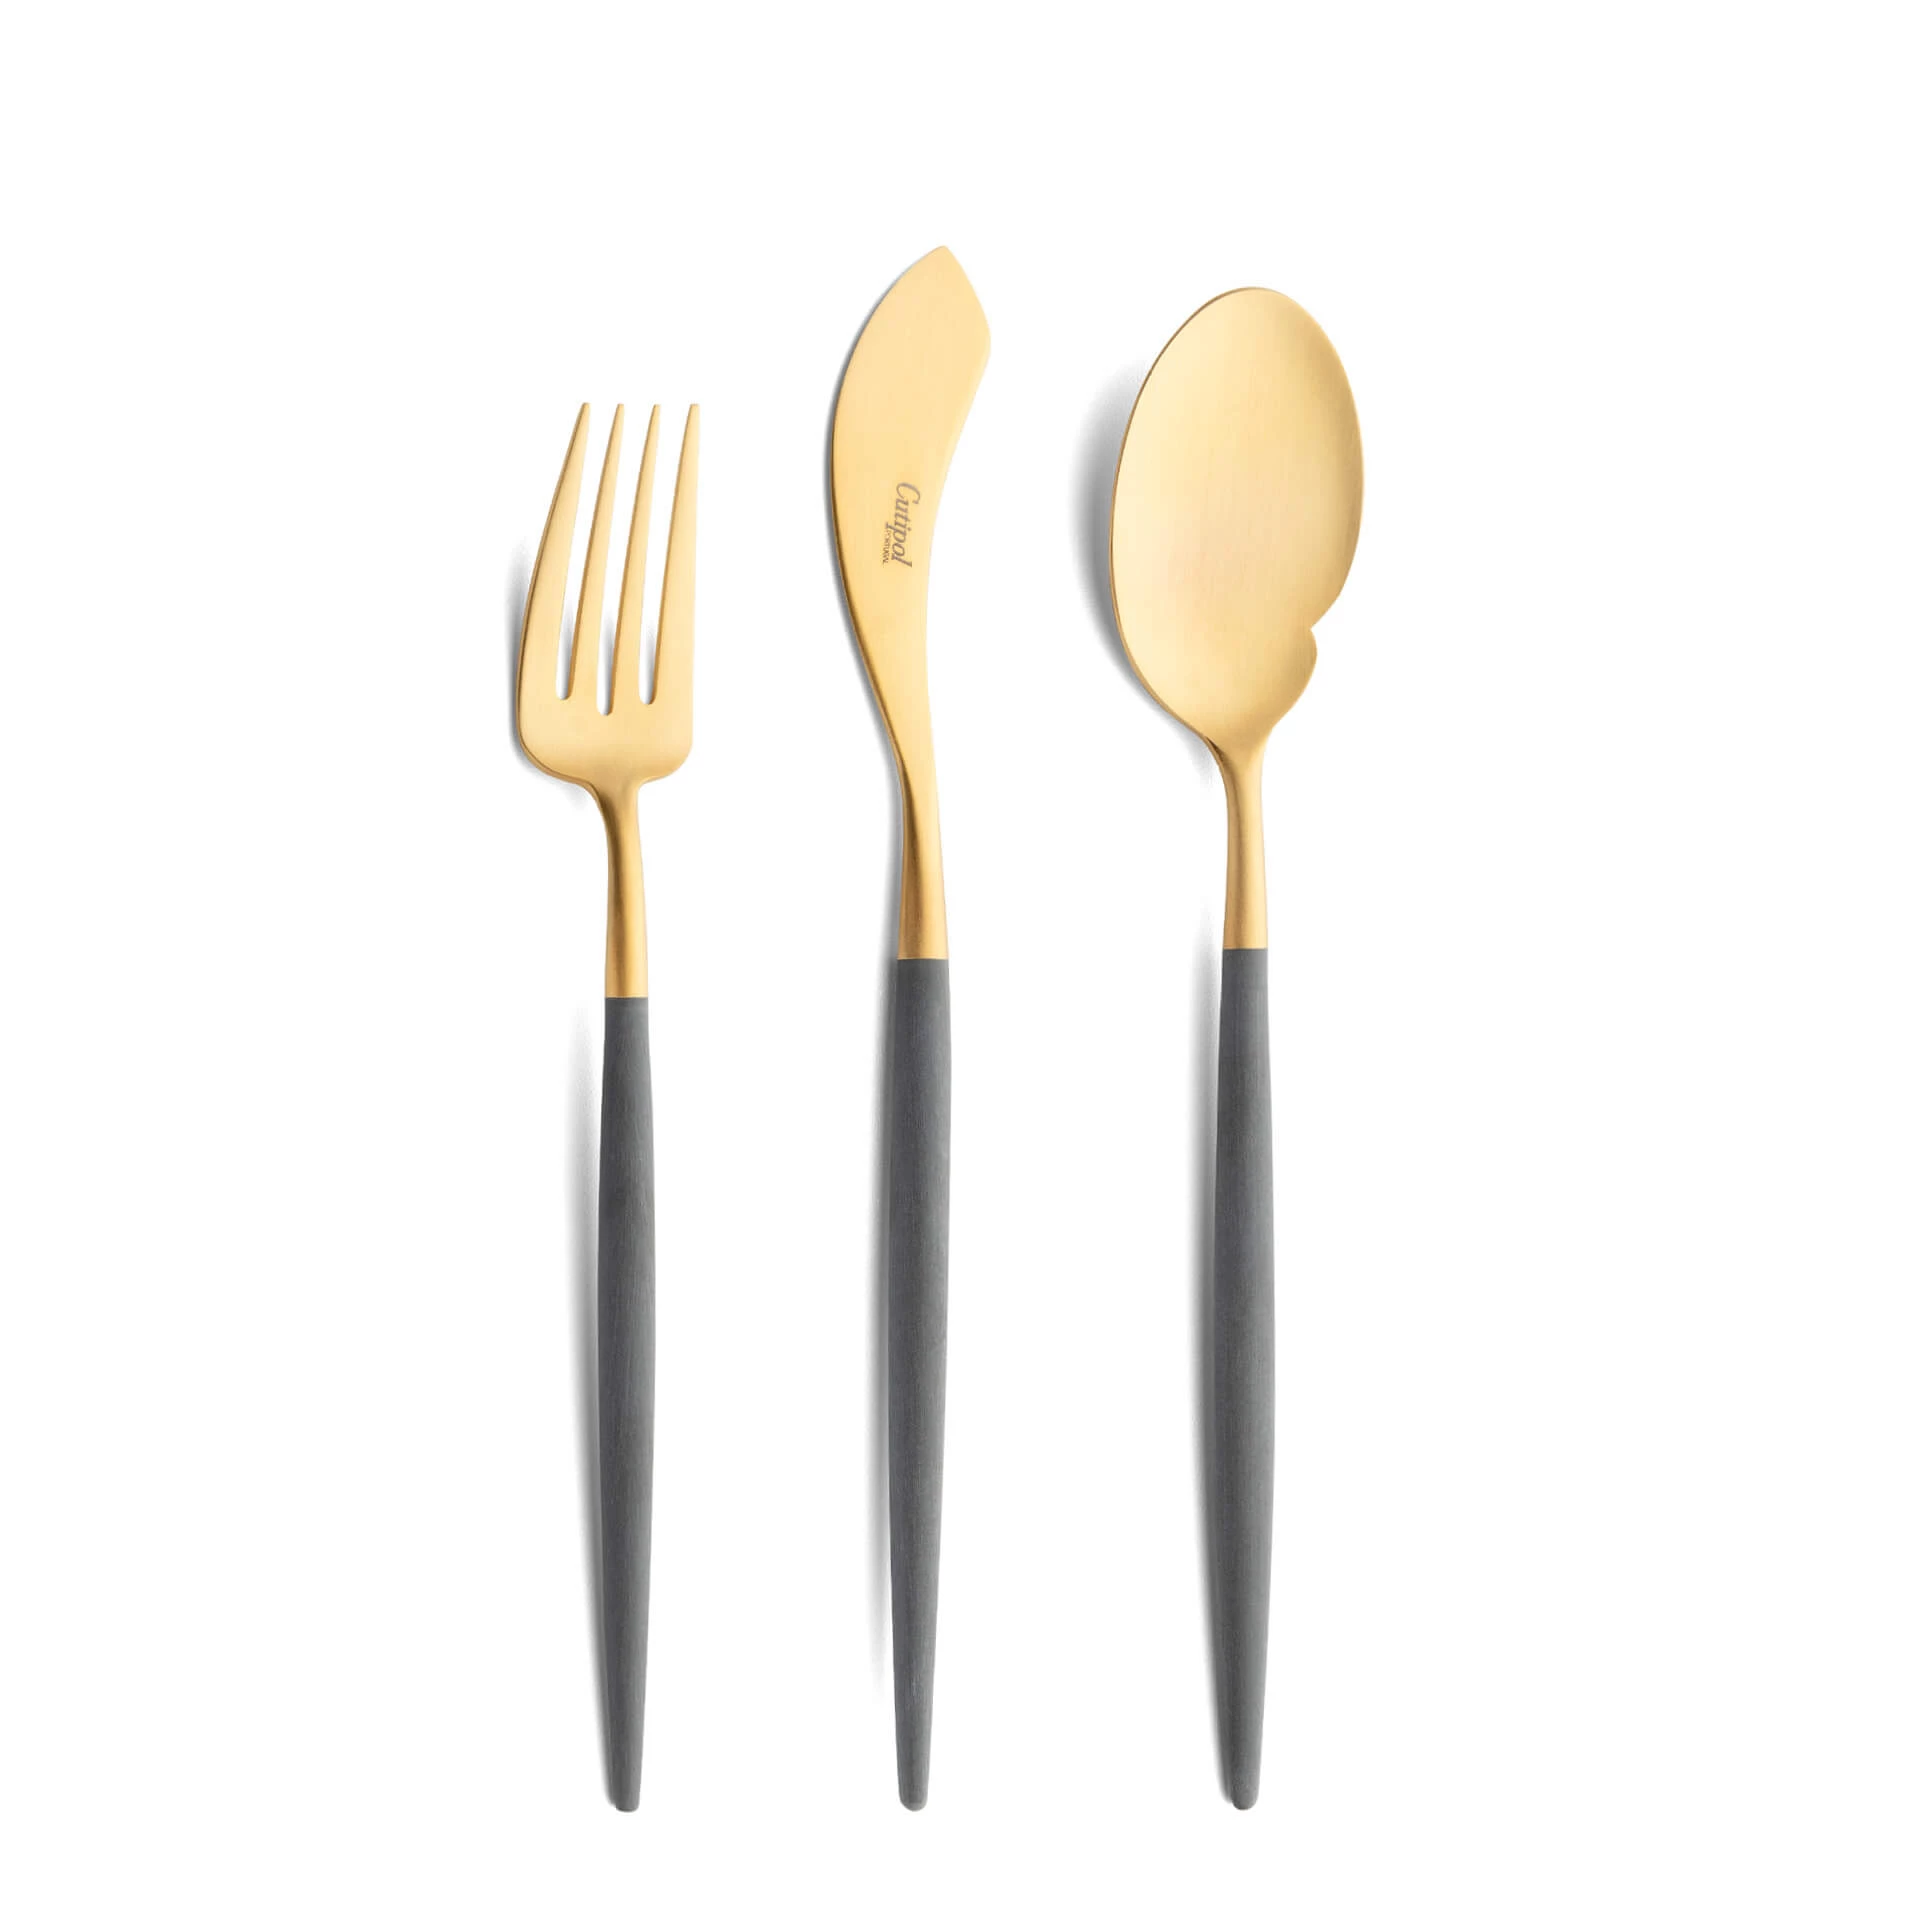 Cutipol Cutlery Goa Grey Gold with fish fork, fish knife and gourmet spoon